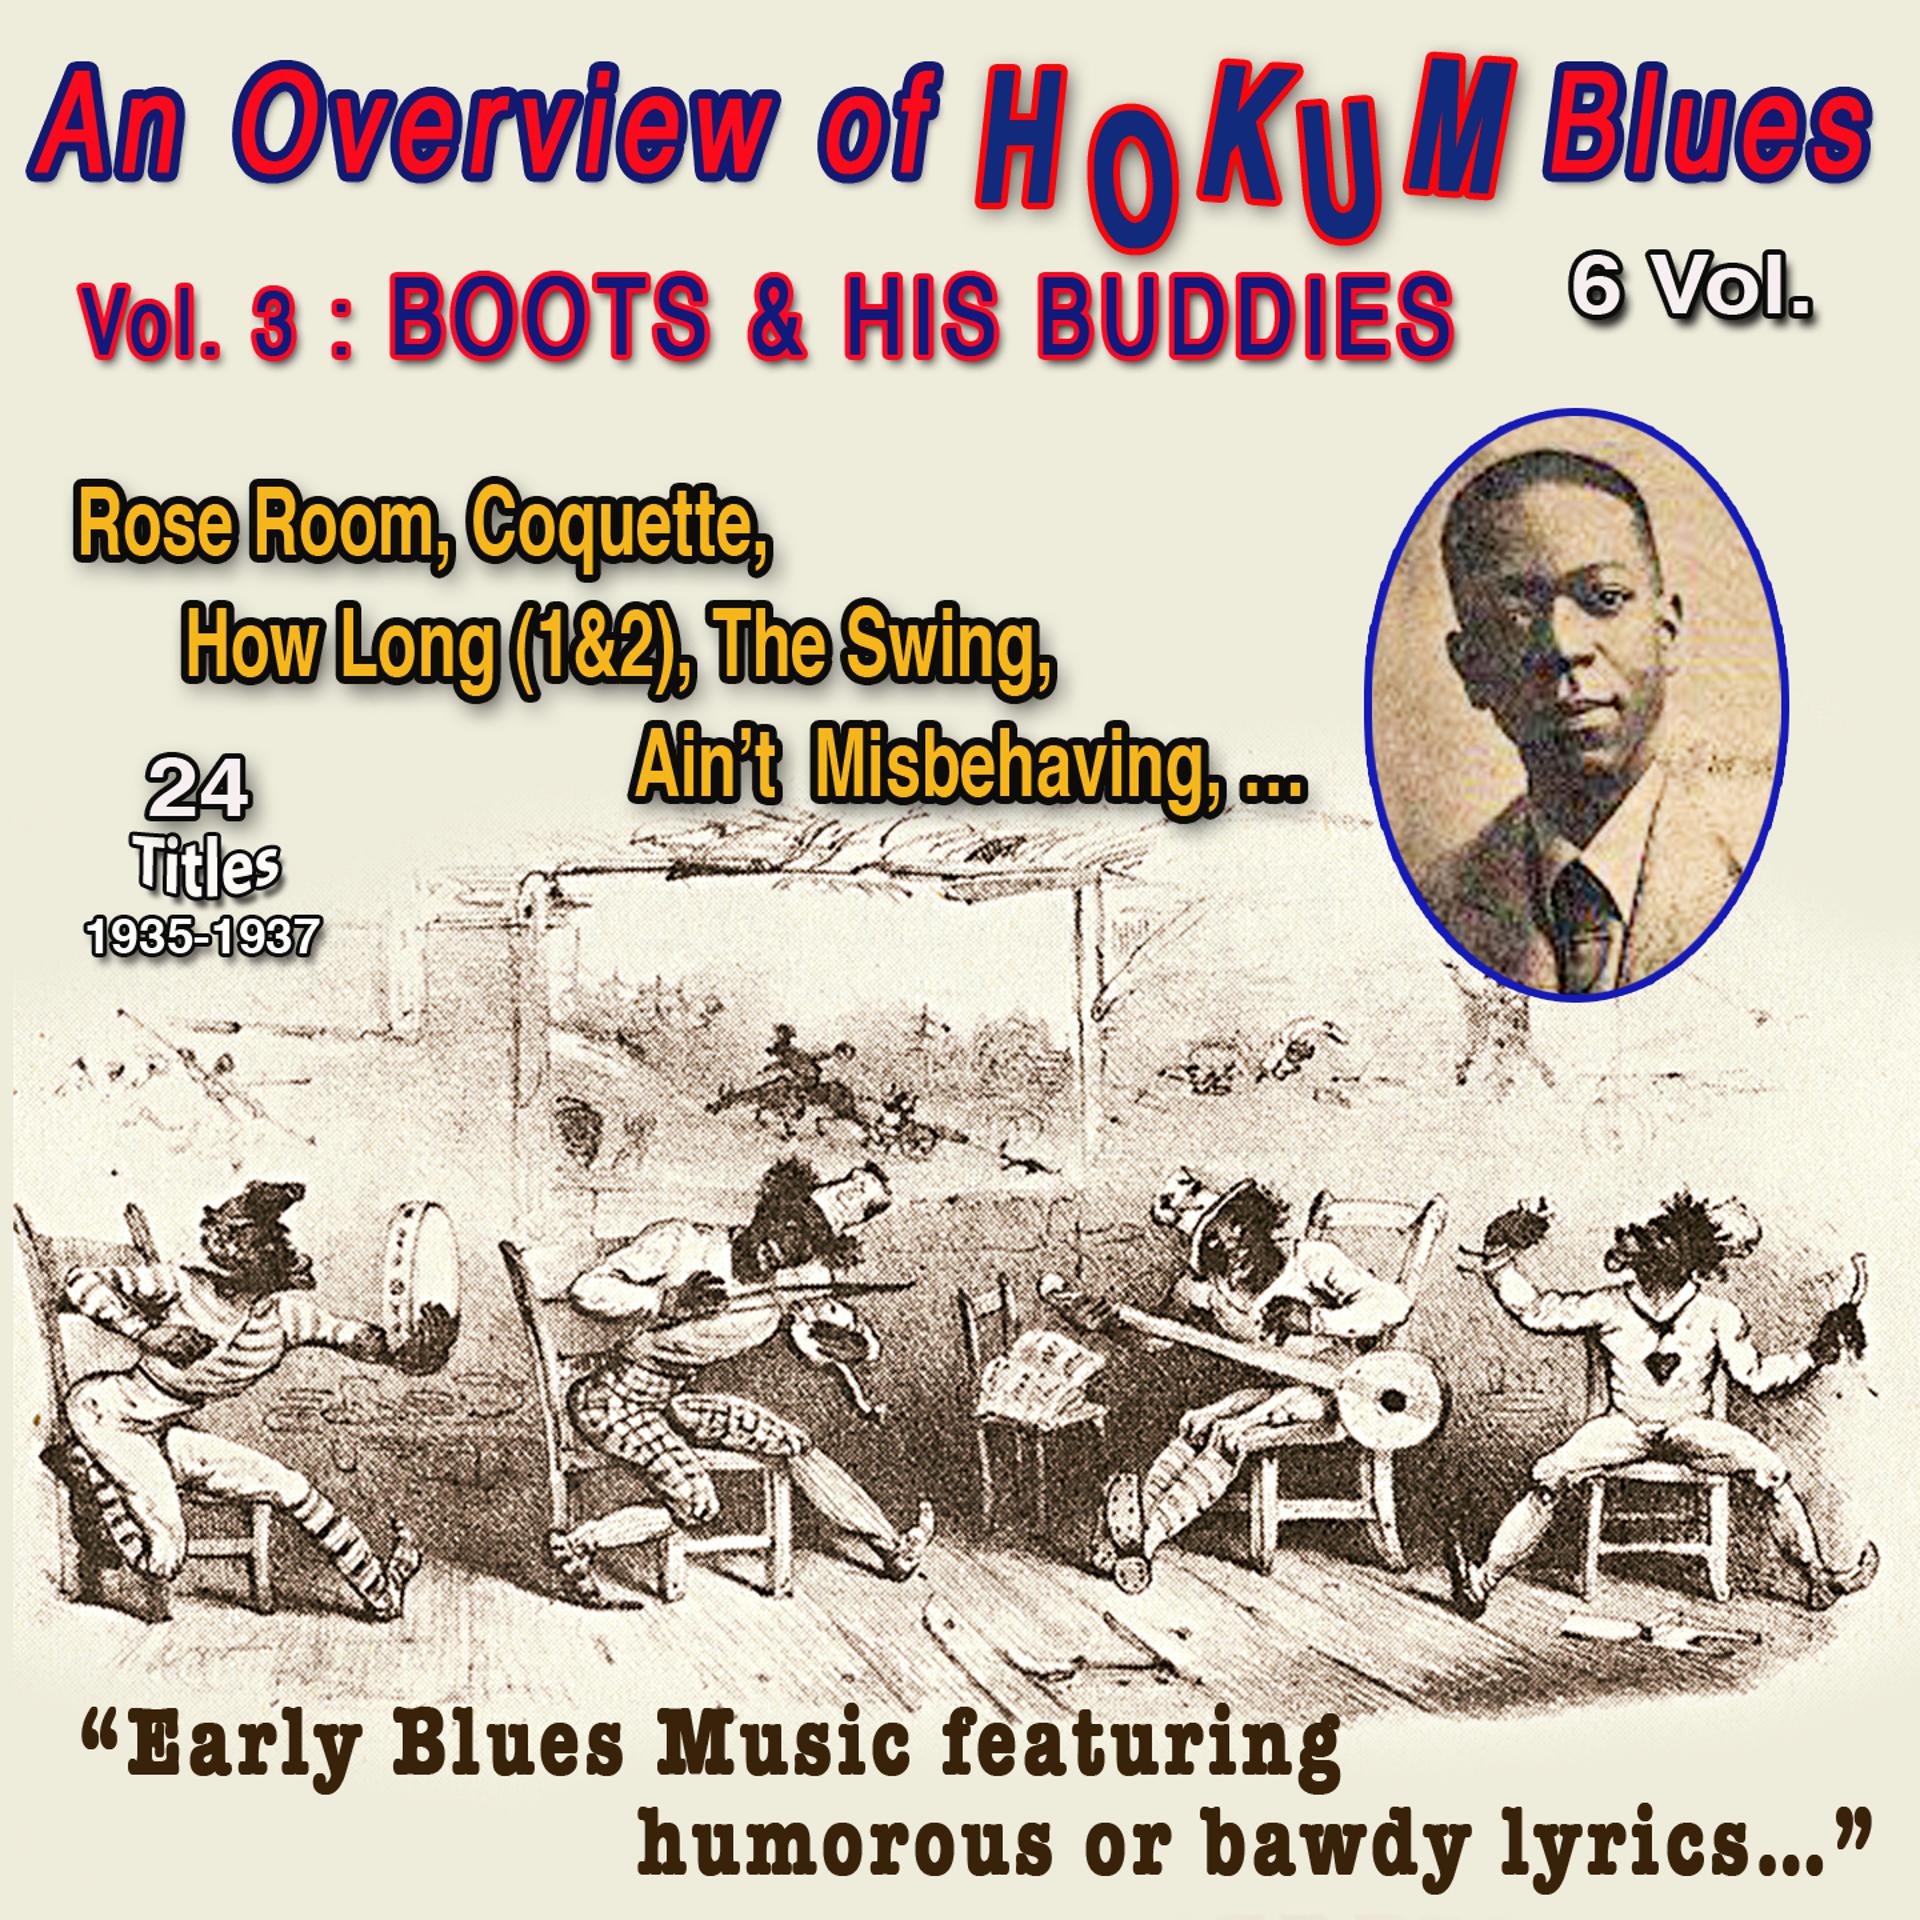 Постер альбома An Overview of Hokum Blues 6 Vol. - Vol. 3 : Boots and His Buddies - Early blues music